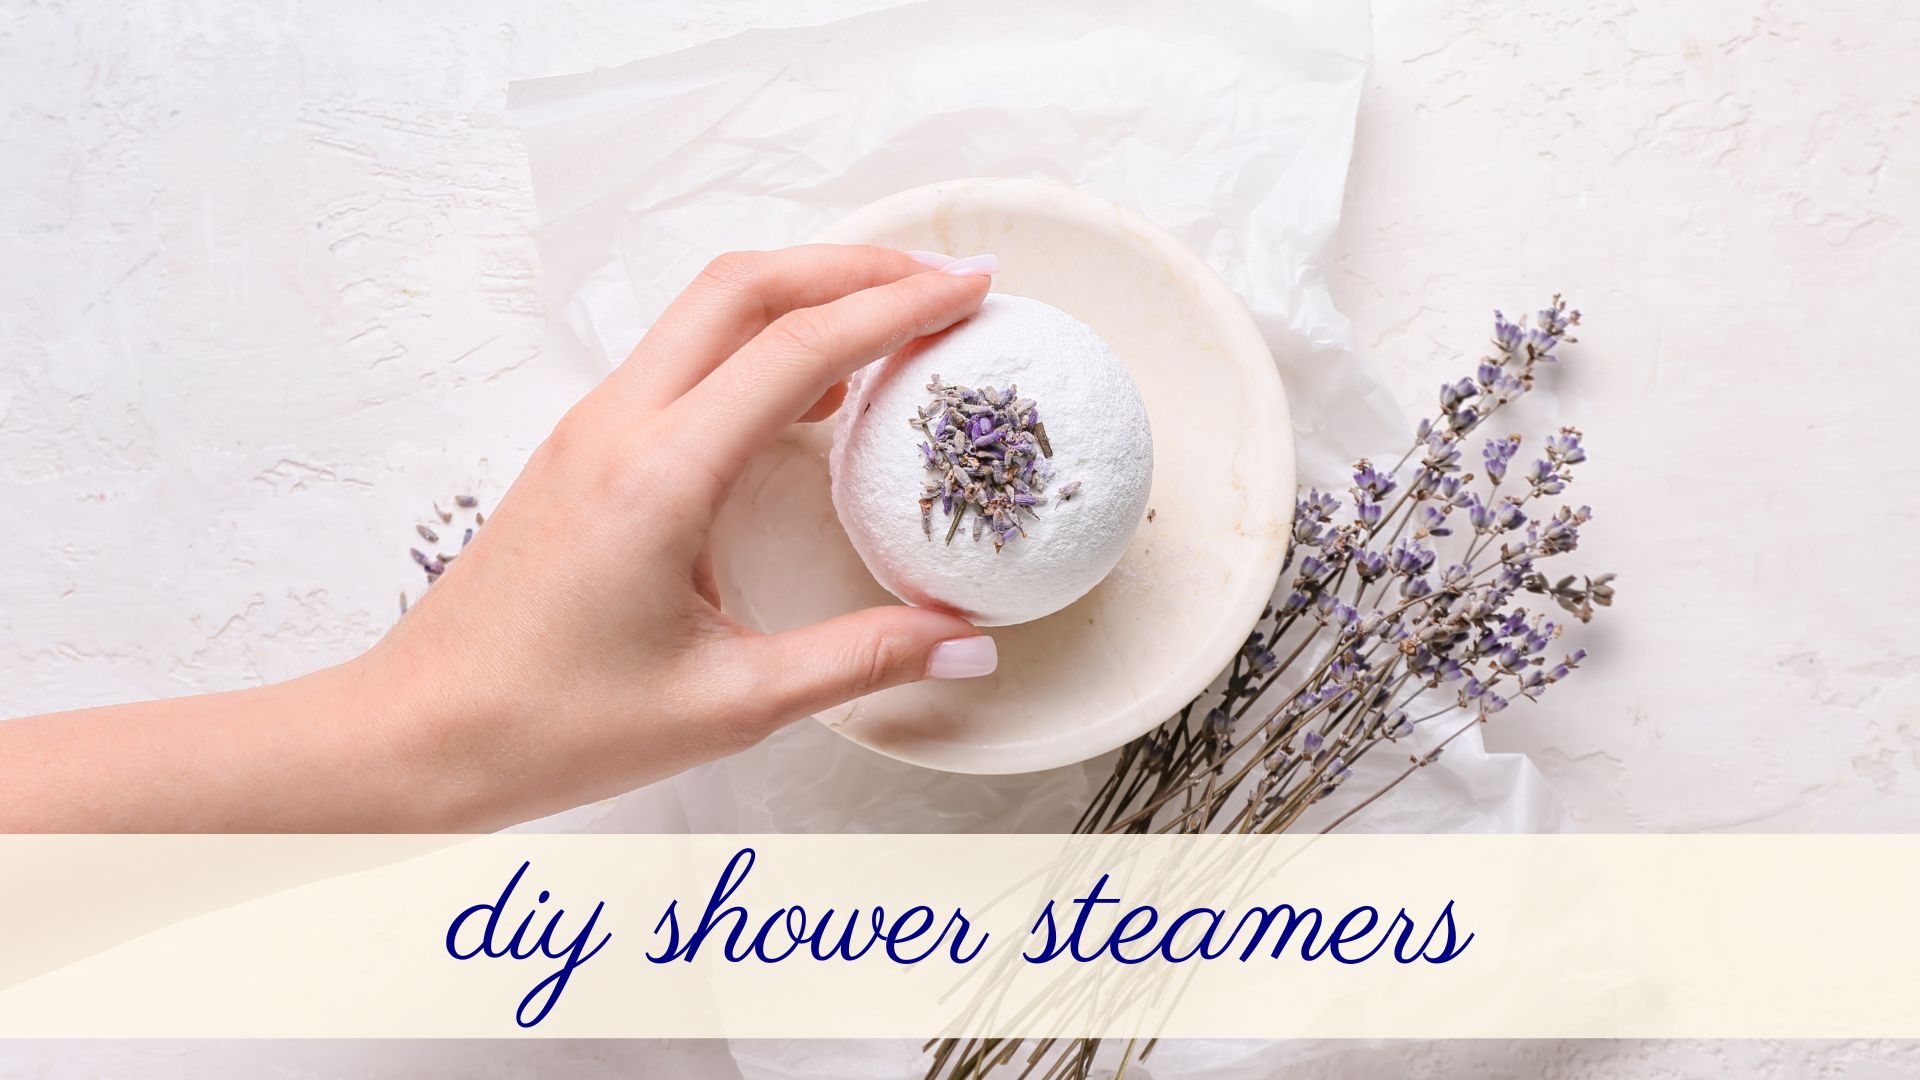 DIY Lavender Shower Steamer, Shower Steamers with Recipe, How To Make  Shower Fizzies